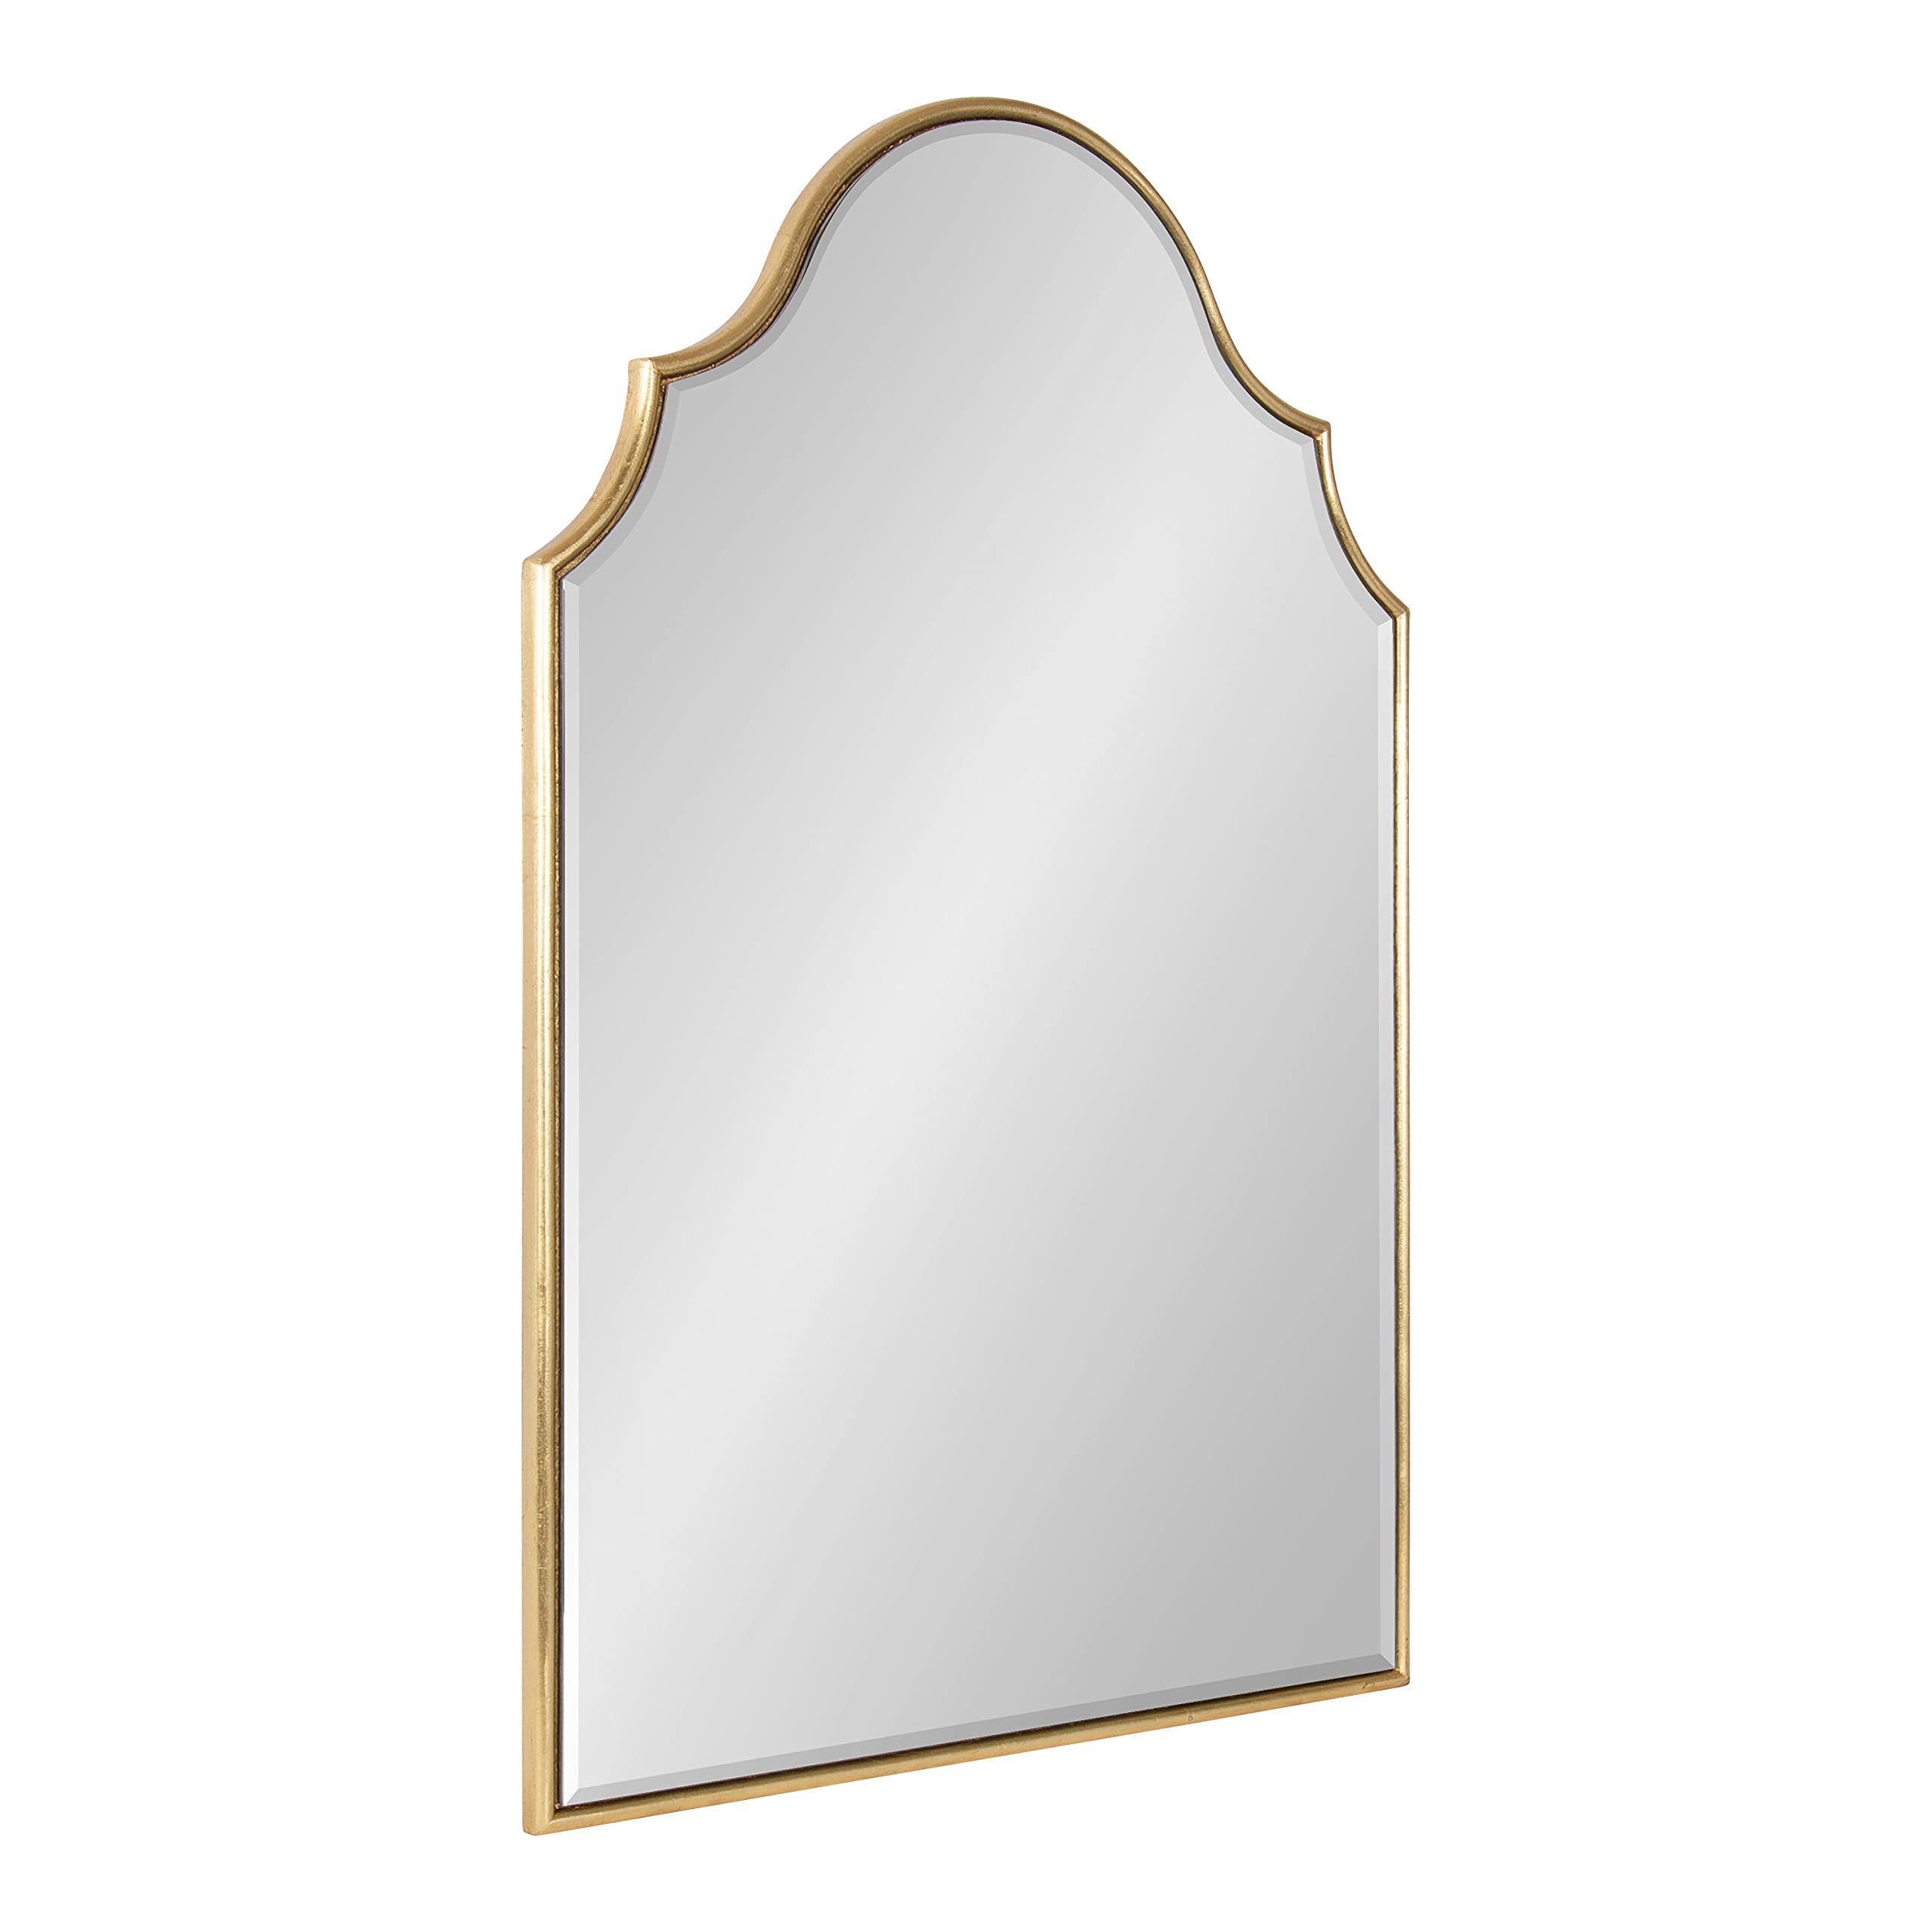 Kate and Laurel Leanna Arch Framed Wall Mirror, 20x30, Gold | Amazon (US)